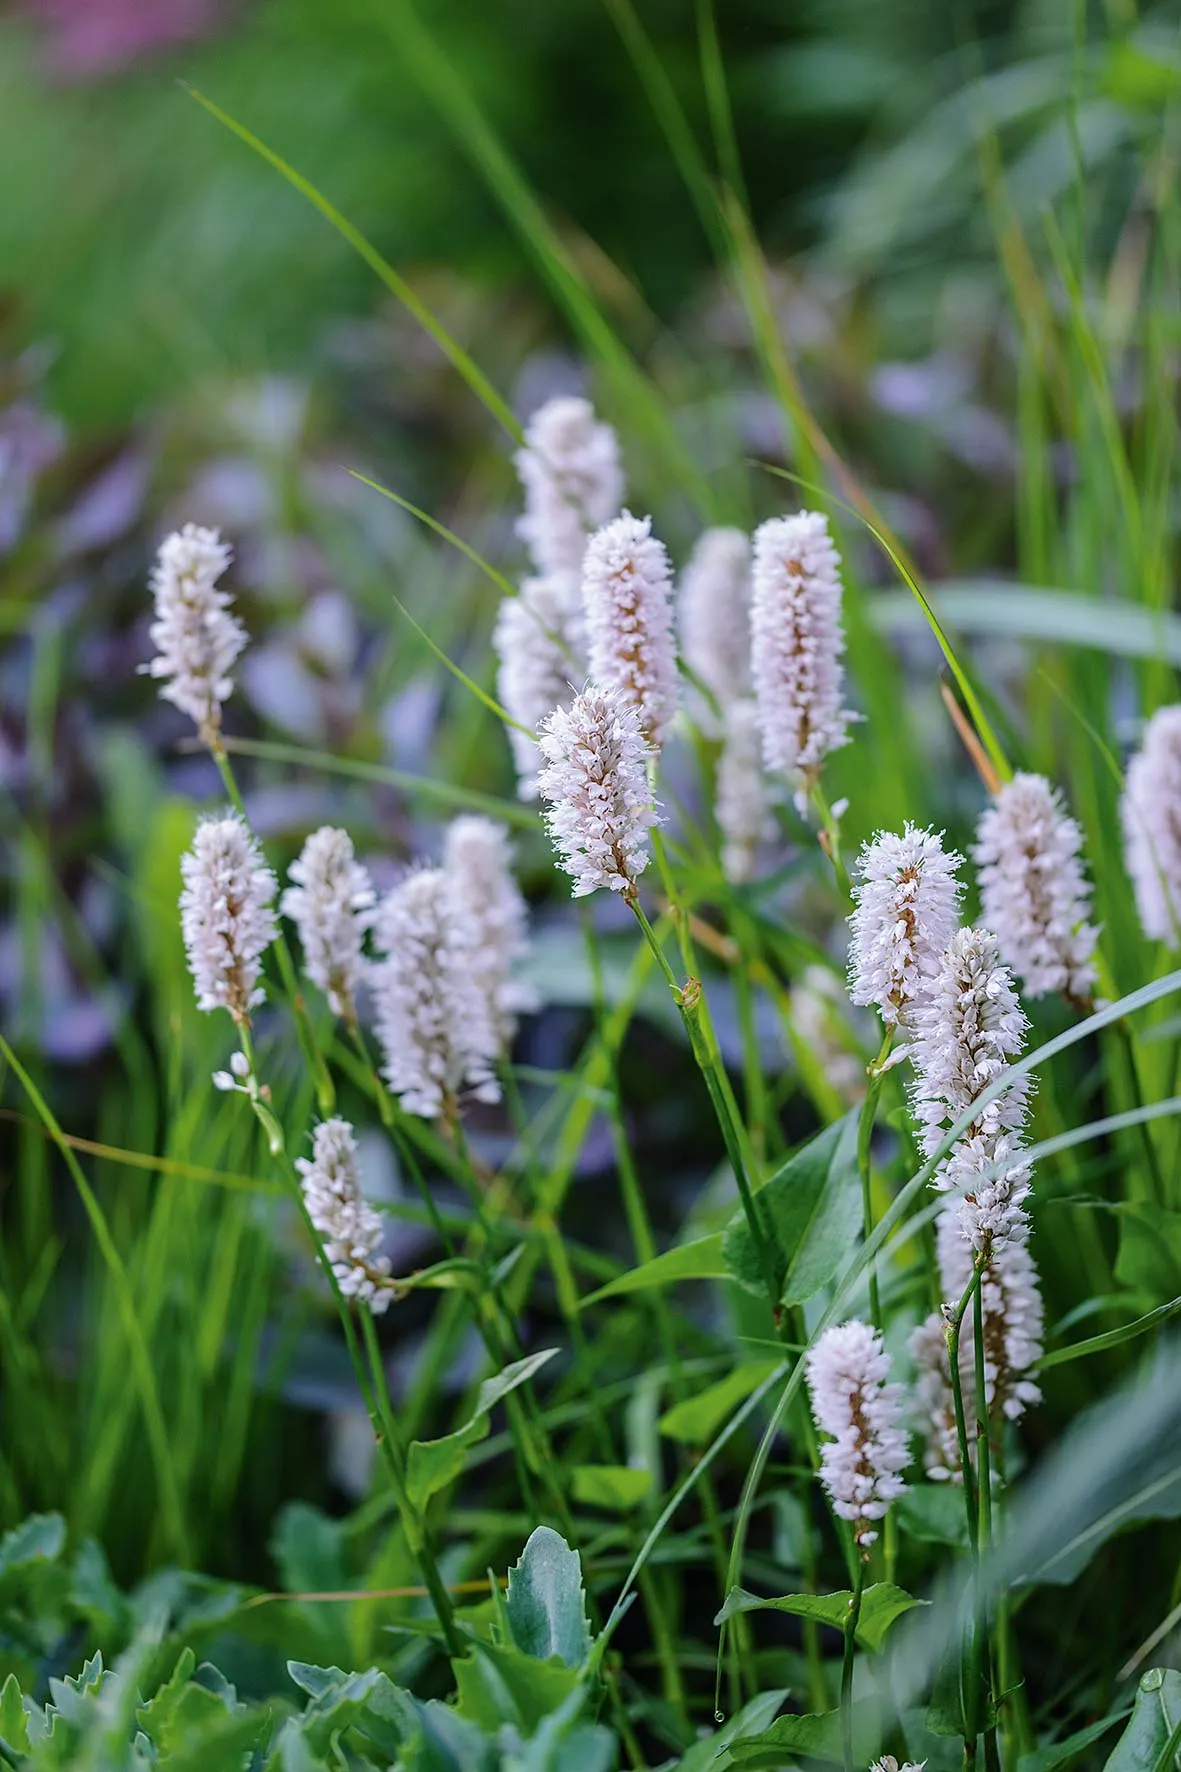 Persicaria bistorta ‘Superba’ lifts the mass of greenery with its lavender flowers.